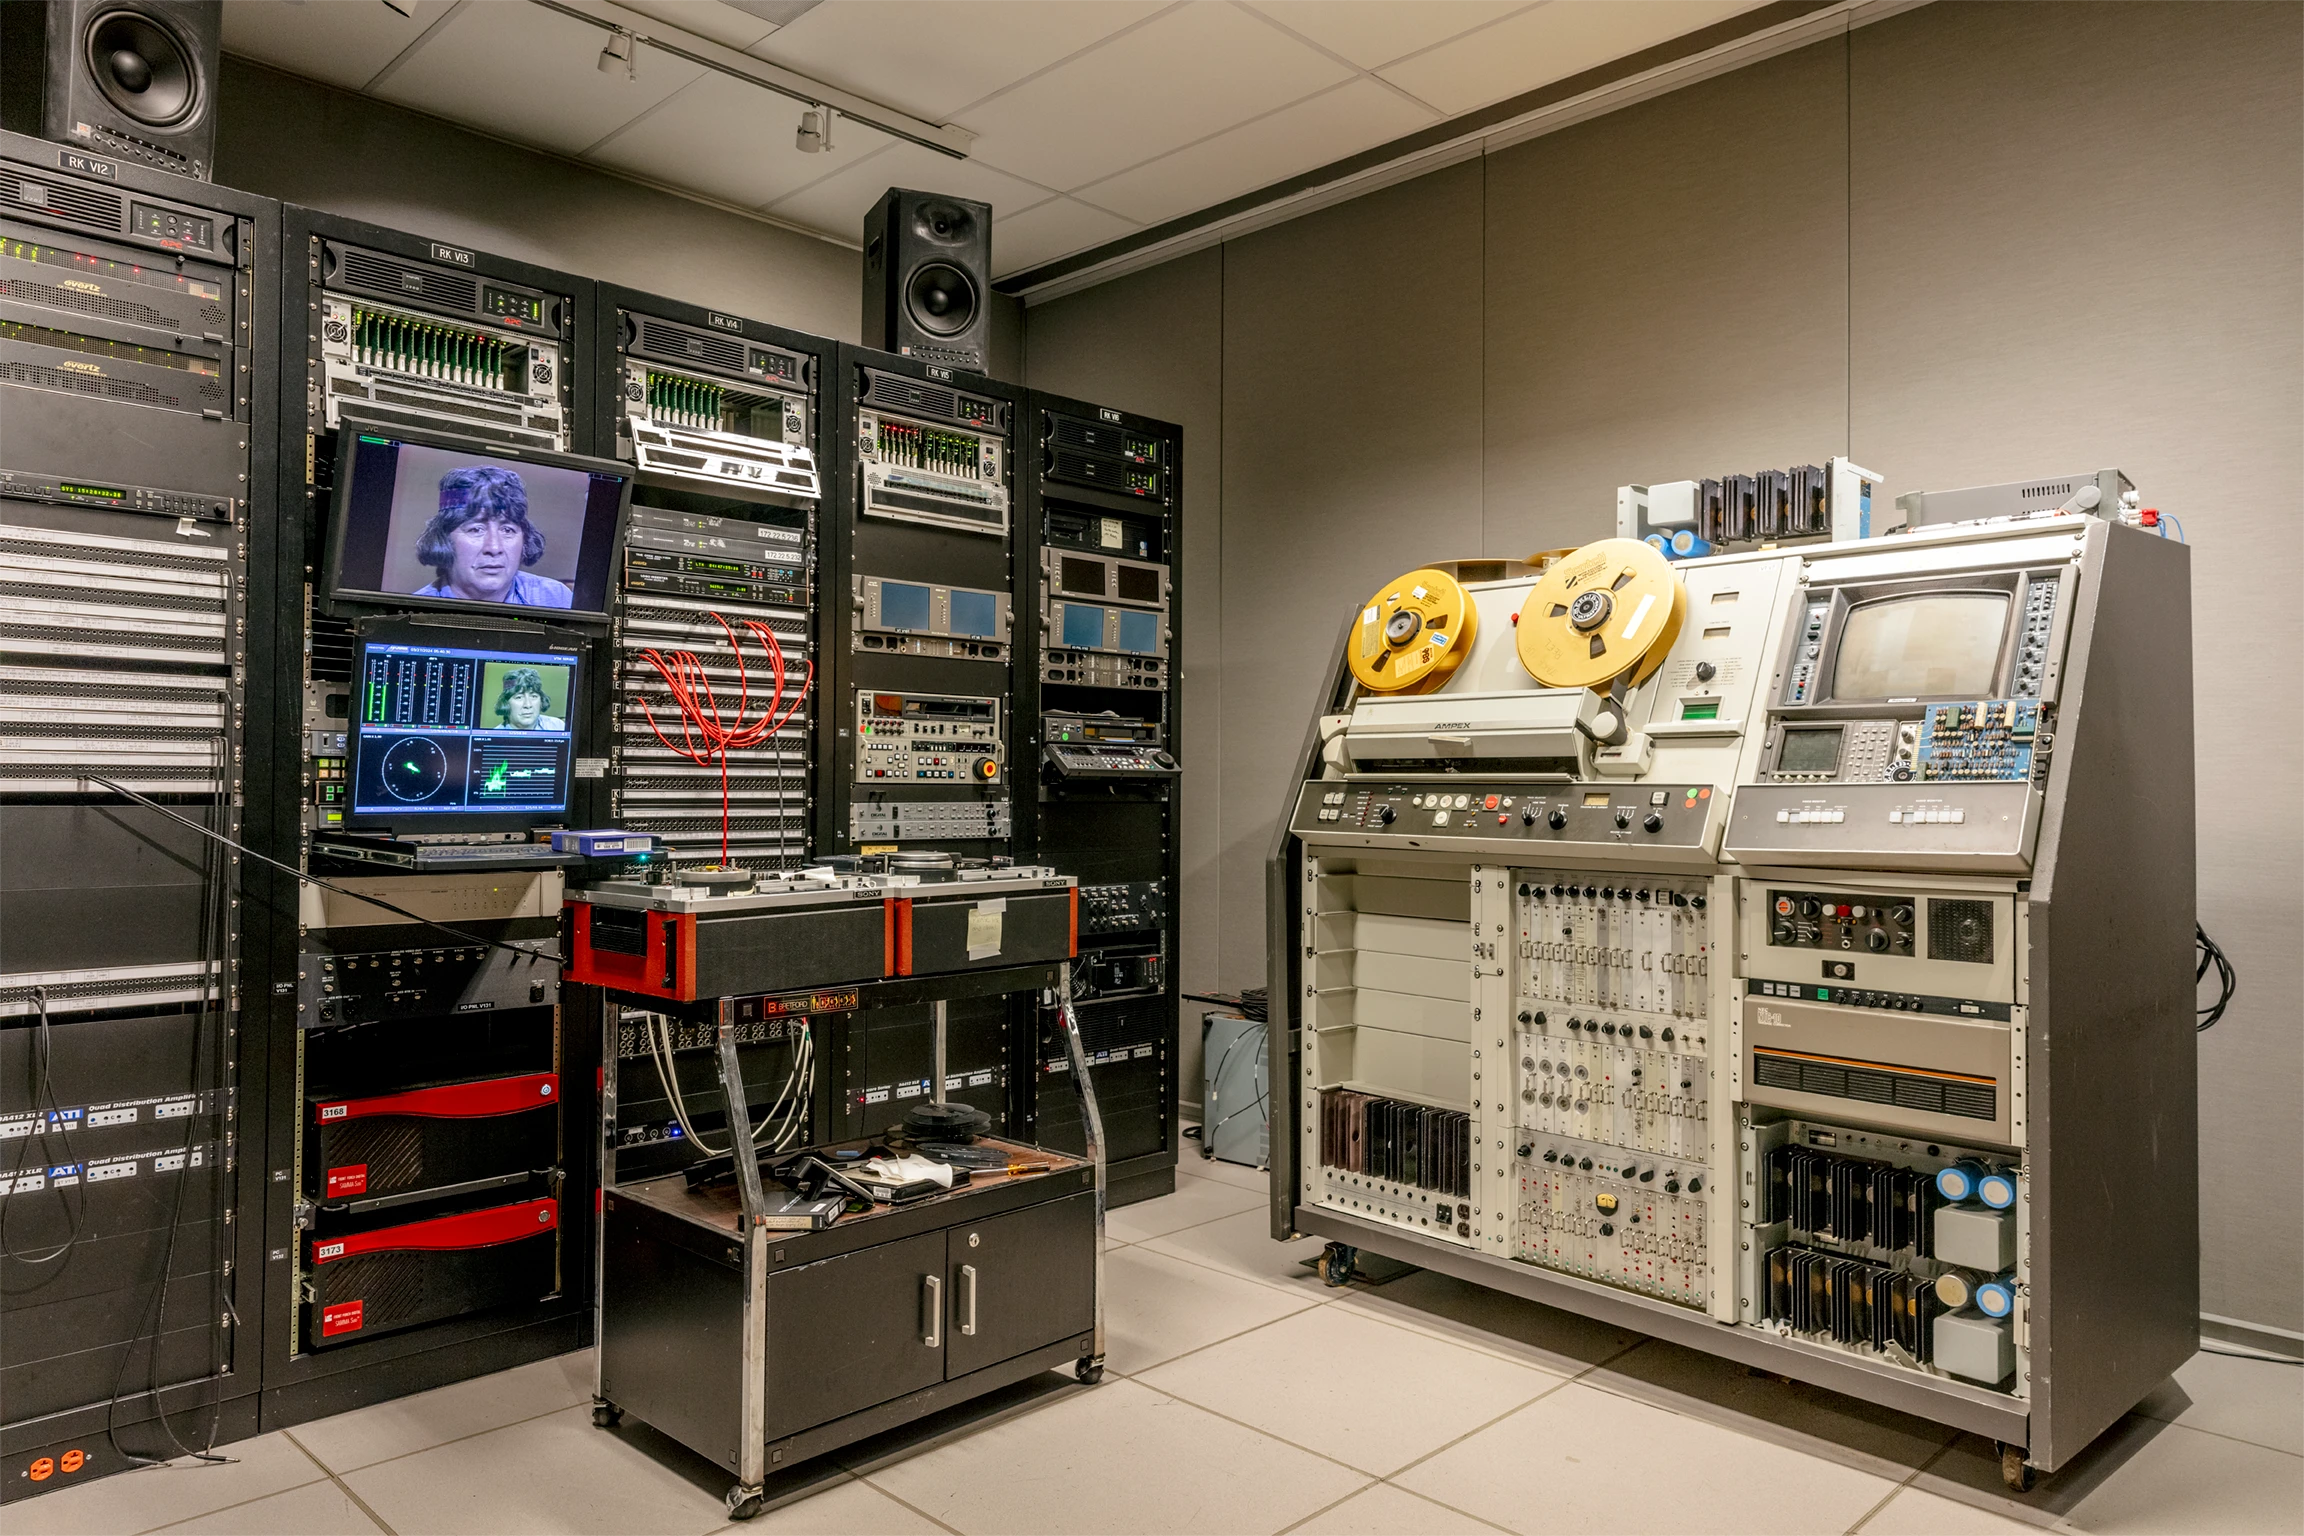 An interior room filled with audio and video equipment 